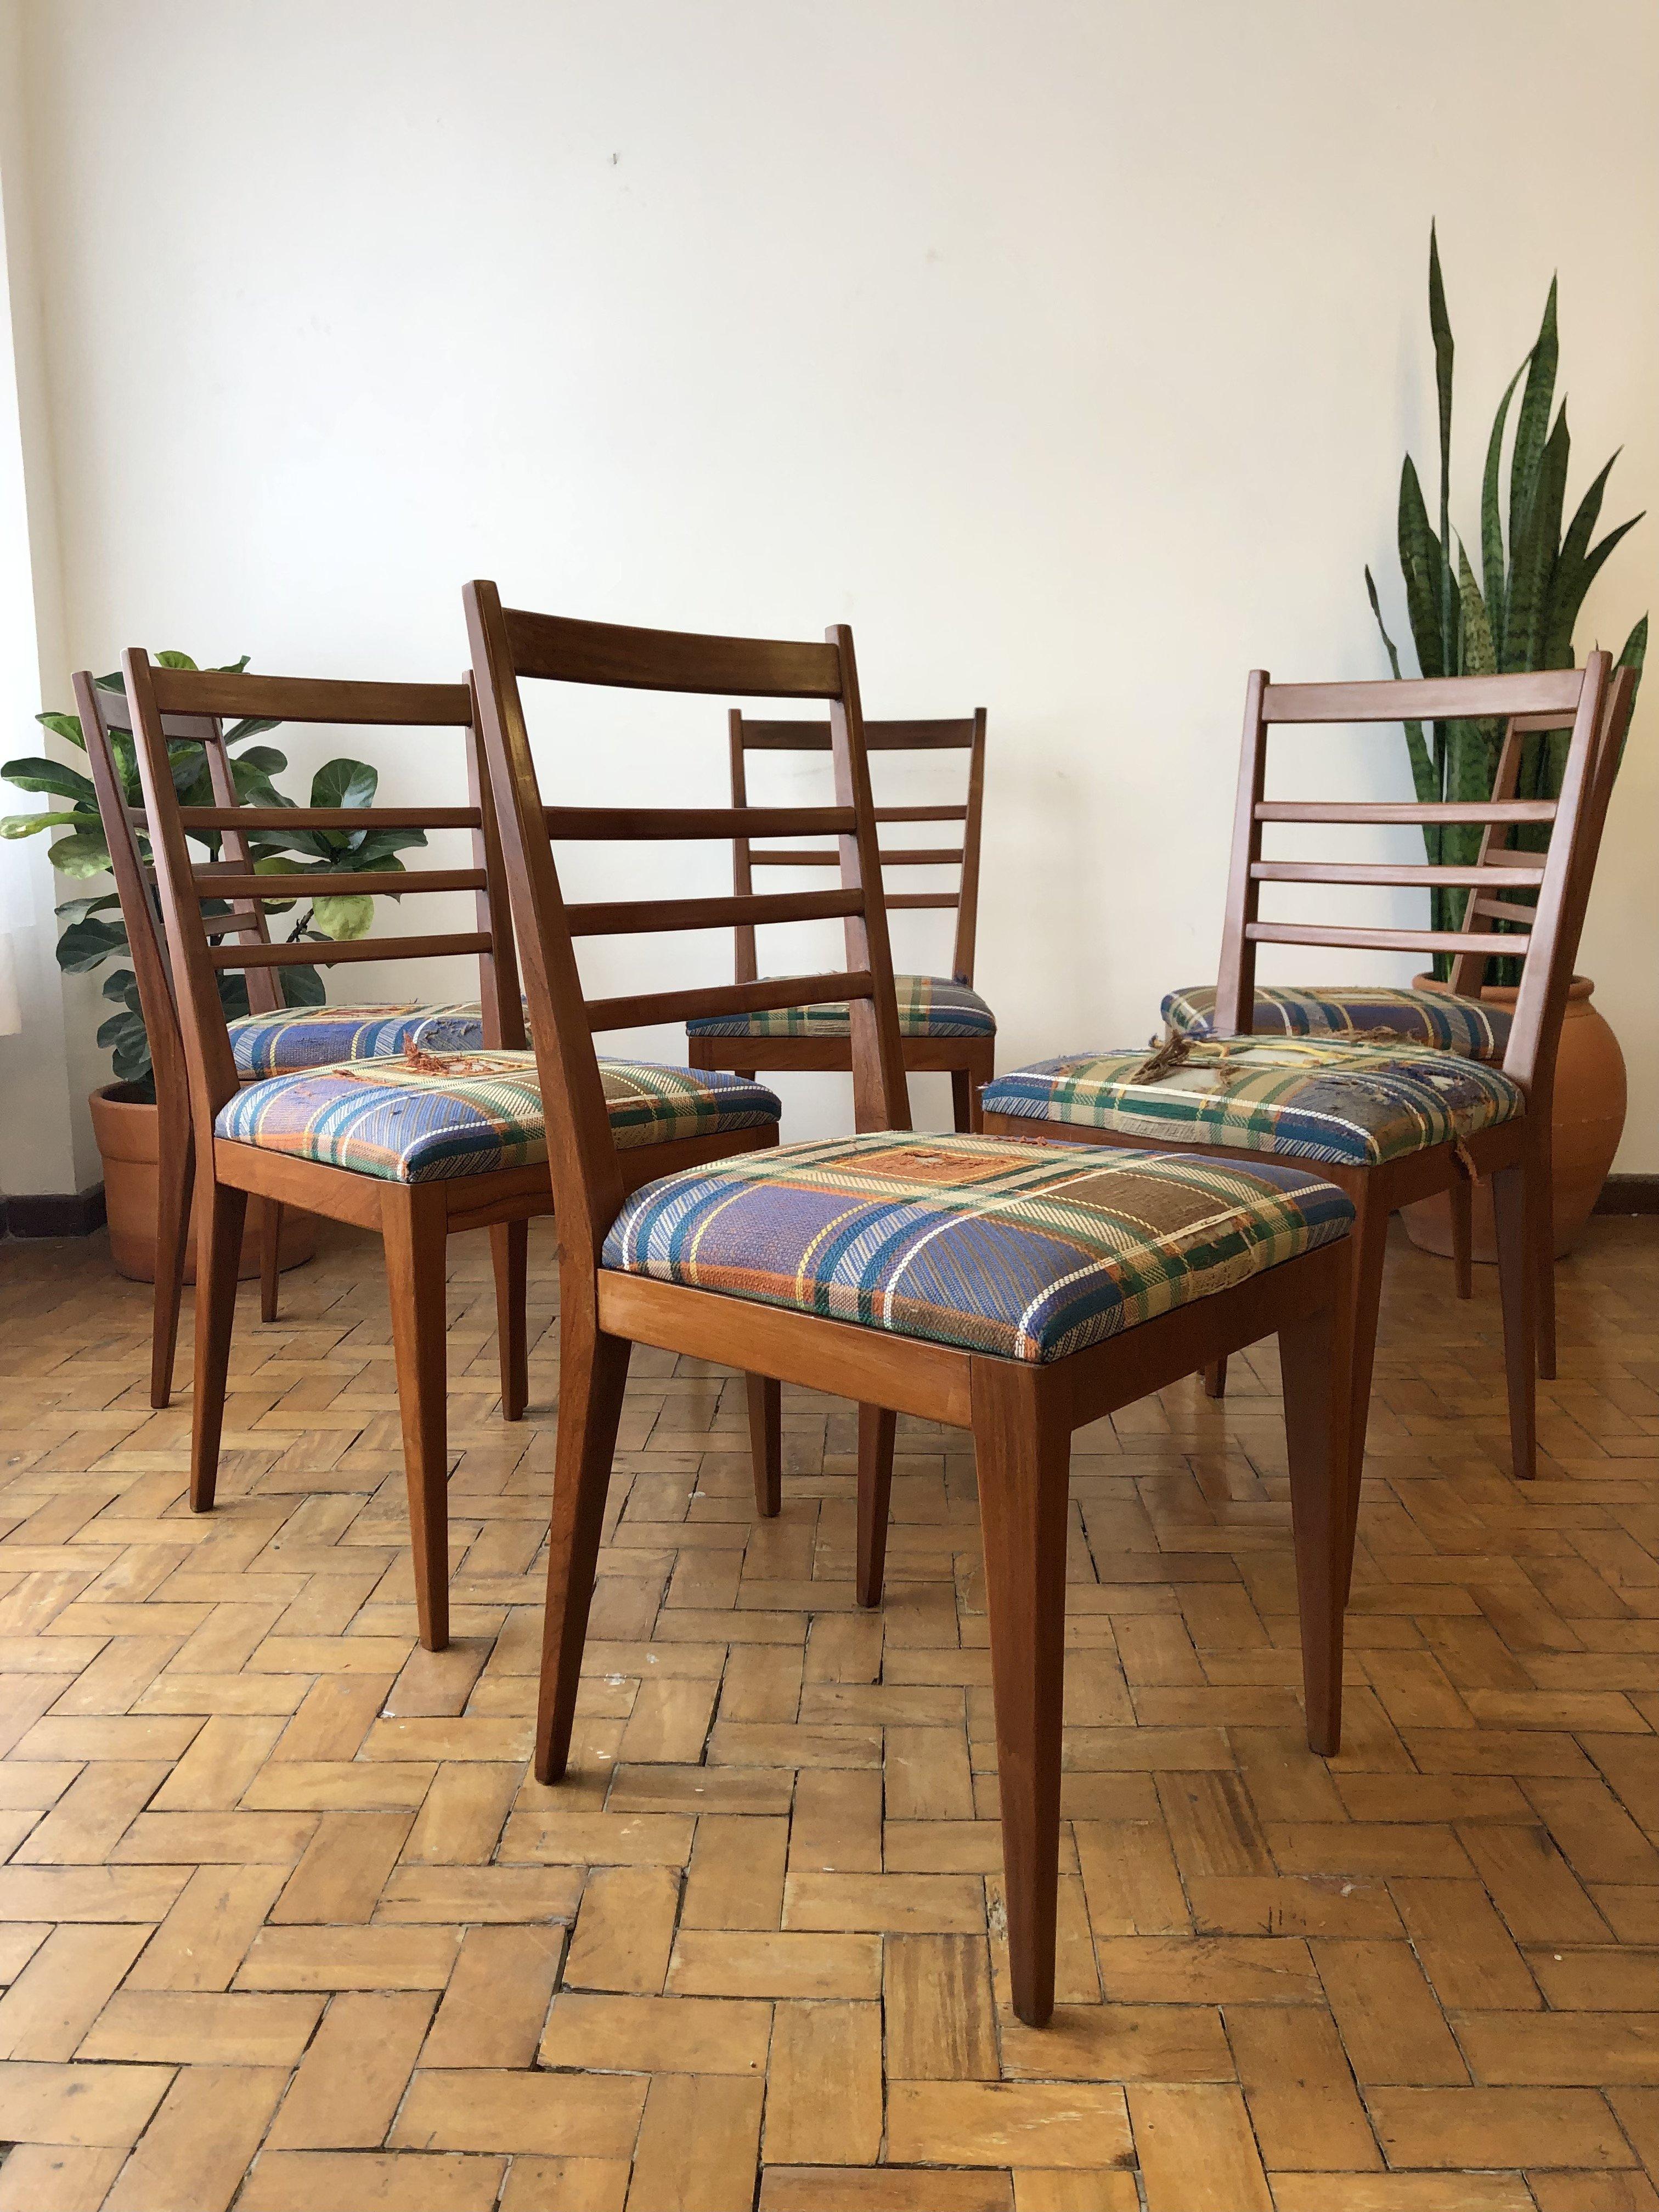 Set of 6 Mid-Century Modern Brazilian chairs in refinished solid wood and original upholstery in foam and weave fabric. We recommend restoration of the upholstery. Firm and resistant structure. In great condition.

Main wear details:
- Upholstery